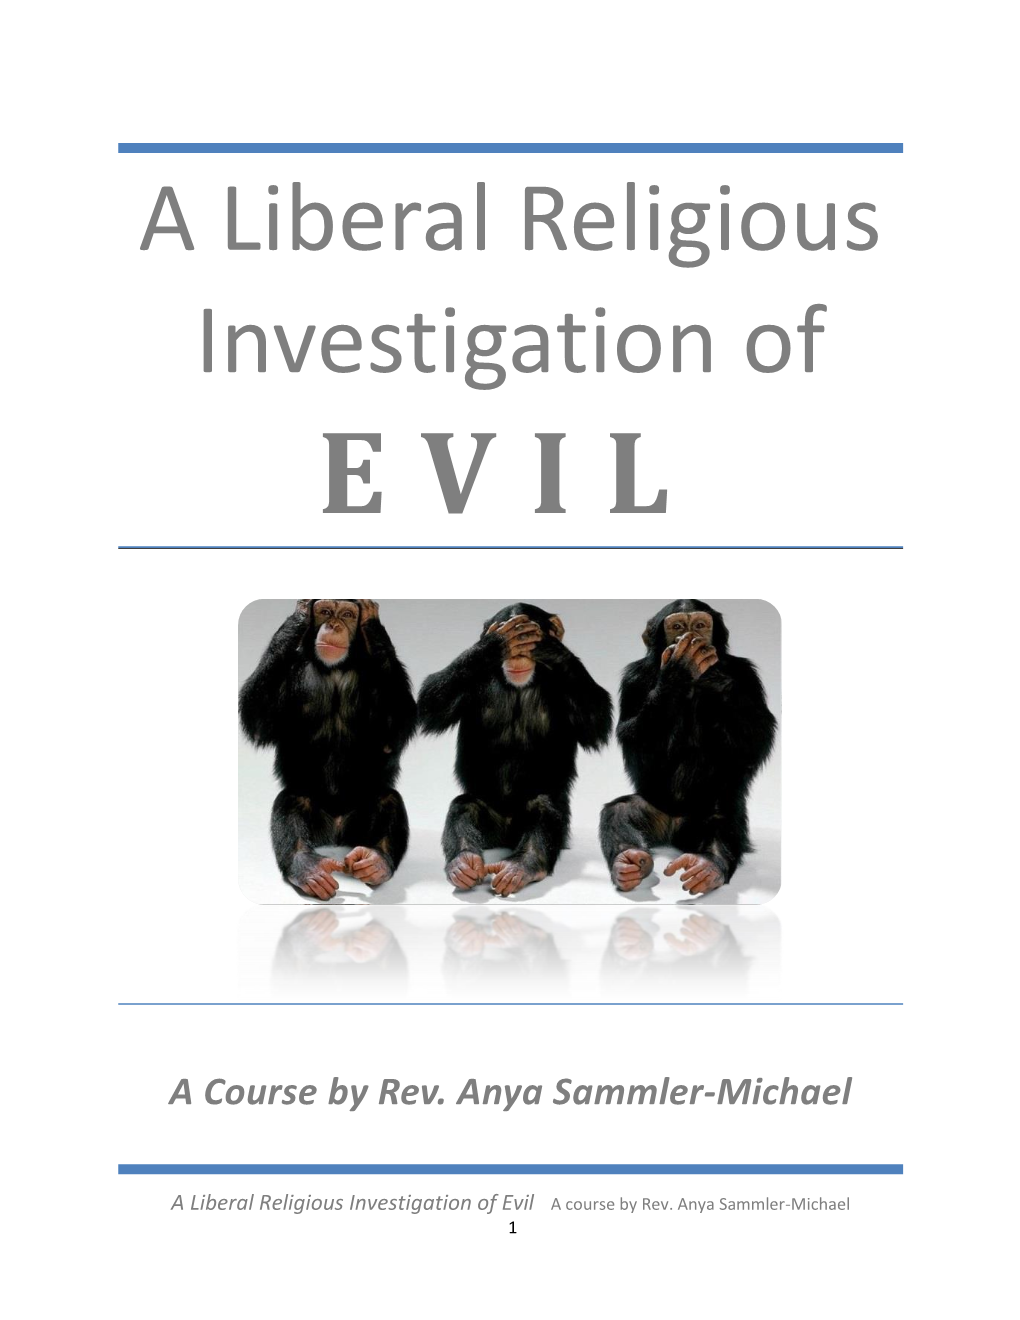 A Liberal Religious Investigation of EVIL